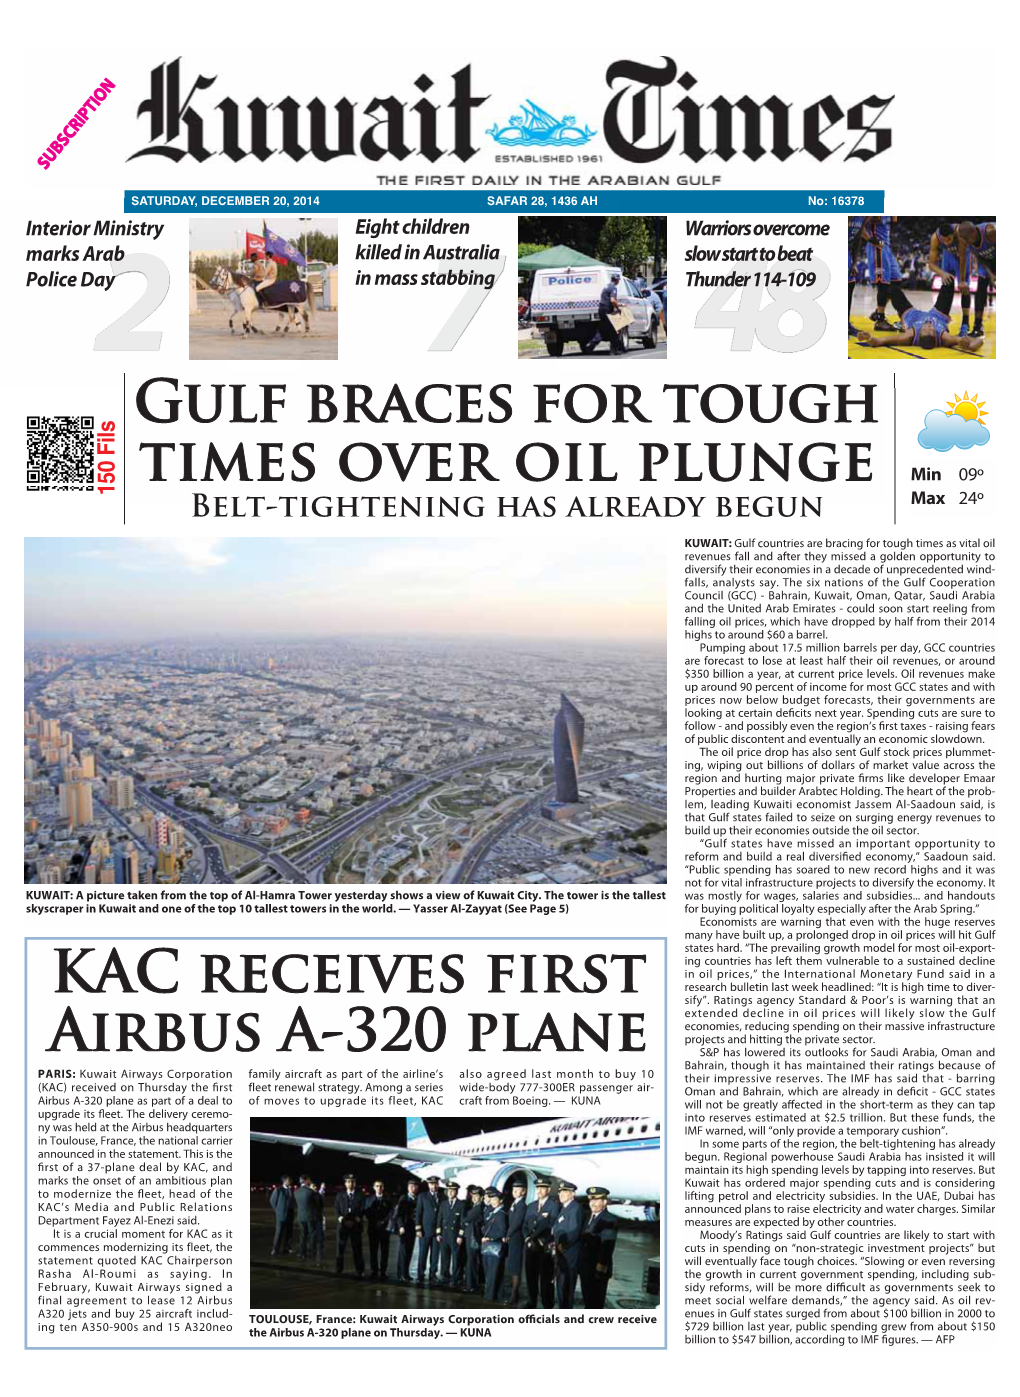 Gulf Braces for Tough Times Over Oil Plunge Min 09º KAC Receives First